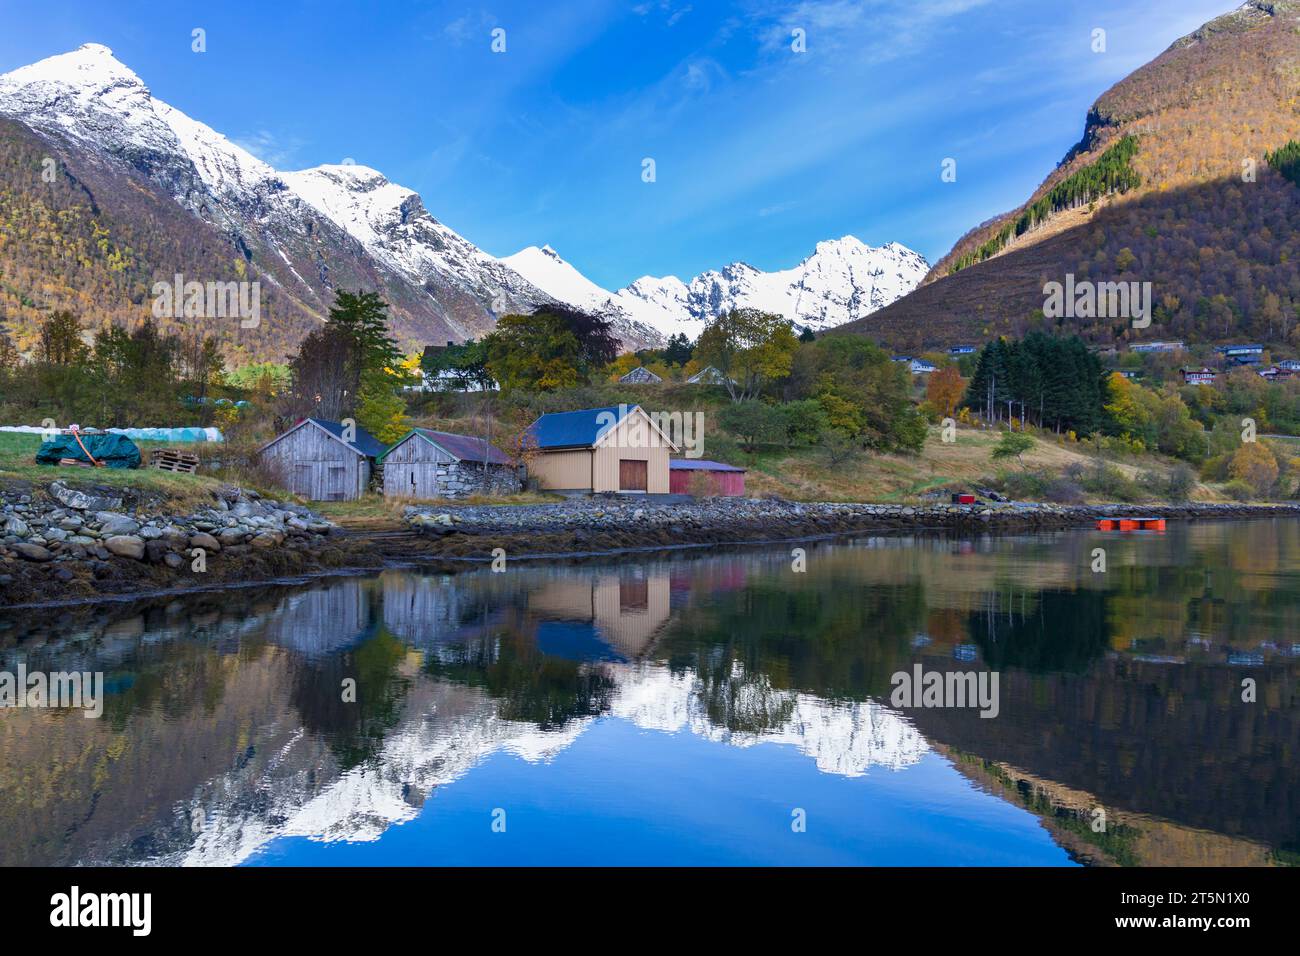 Stunning scenery with mountains & wooden huts reflected in water by Hjorundfjorden fjord at Urke, Norway, Scandinavia, Europe in October Sunnmøre Alps Stock Photo